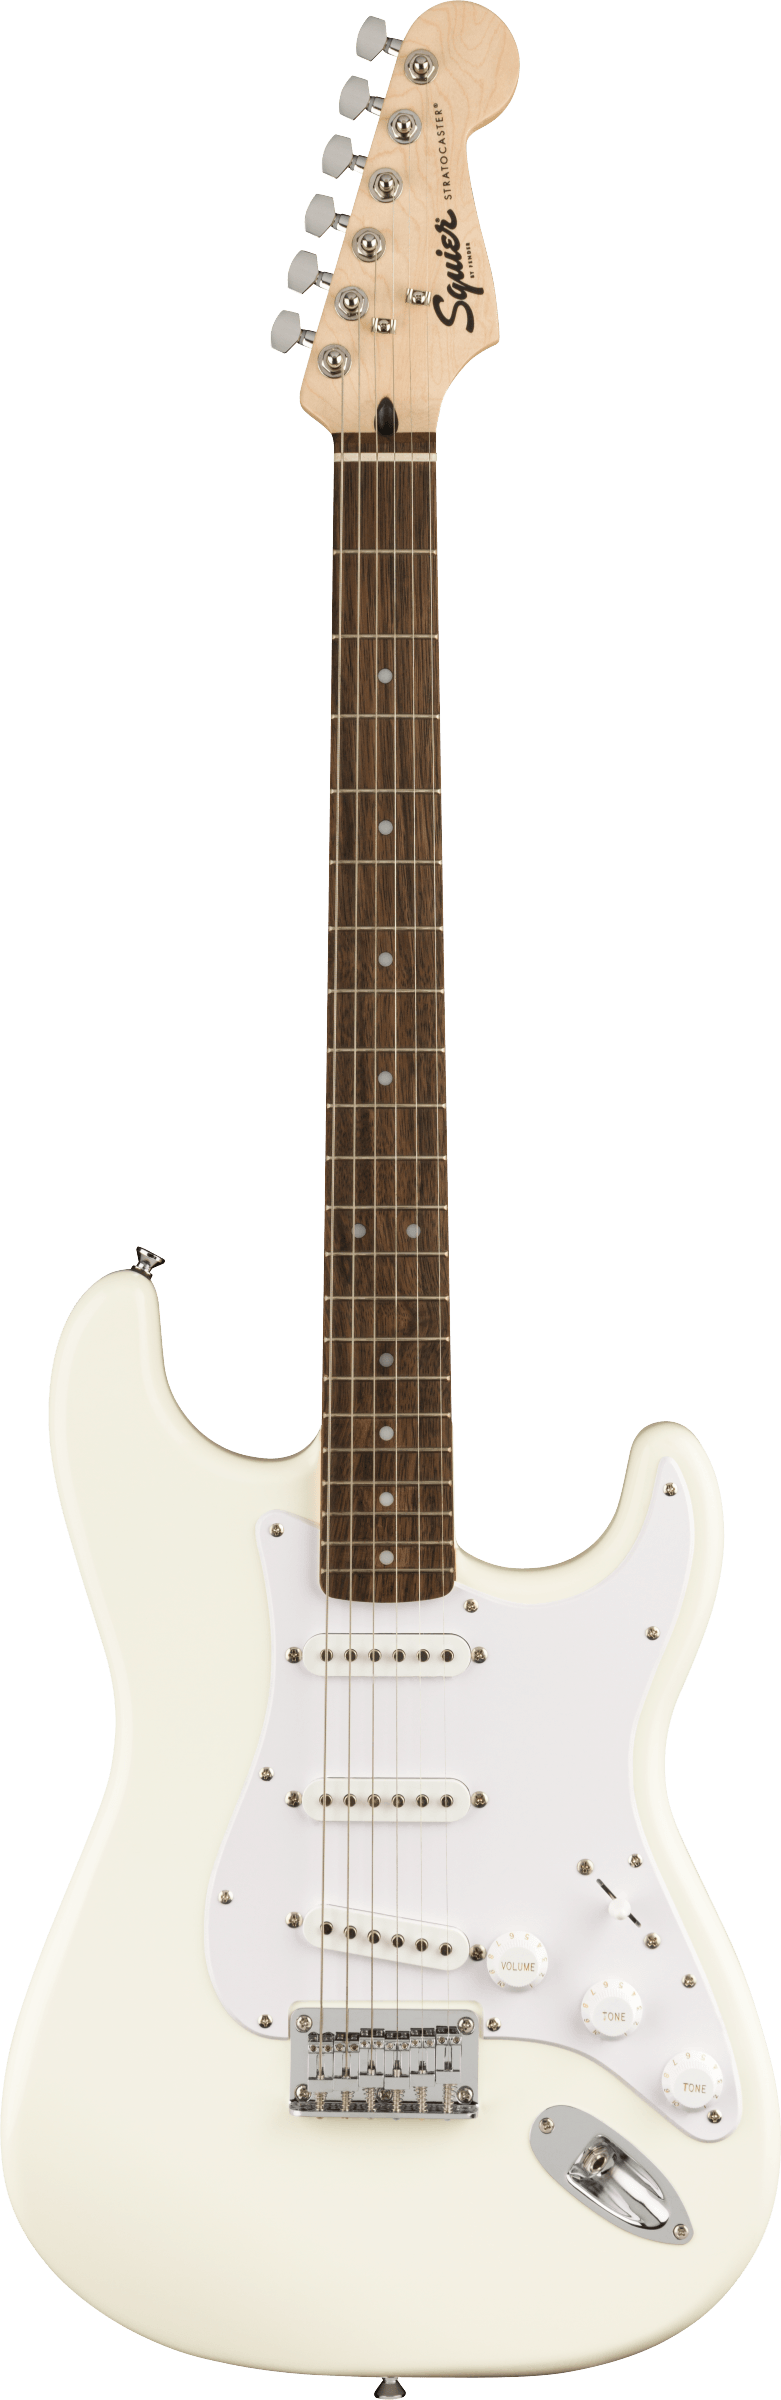 SQUIER BULLET STRATOCASTER HARD-TAIL ELECTRIC GUITAR - ARCTIC WHITE - Joondalup Music Centre